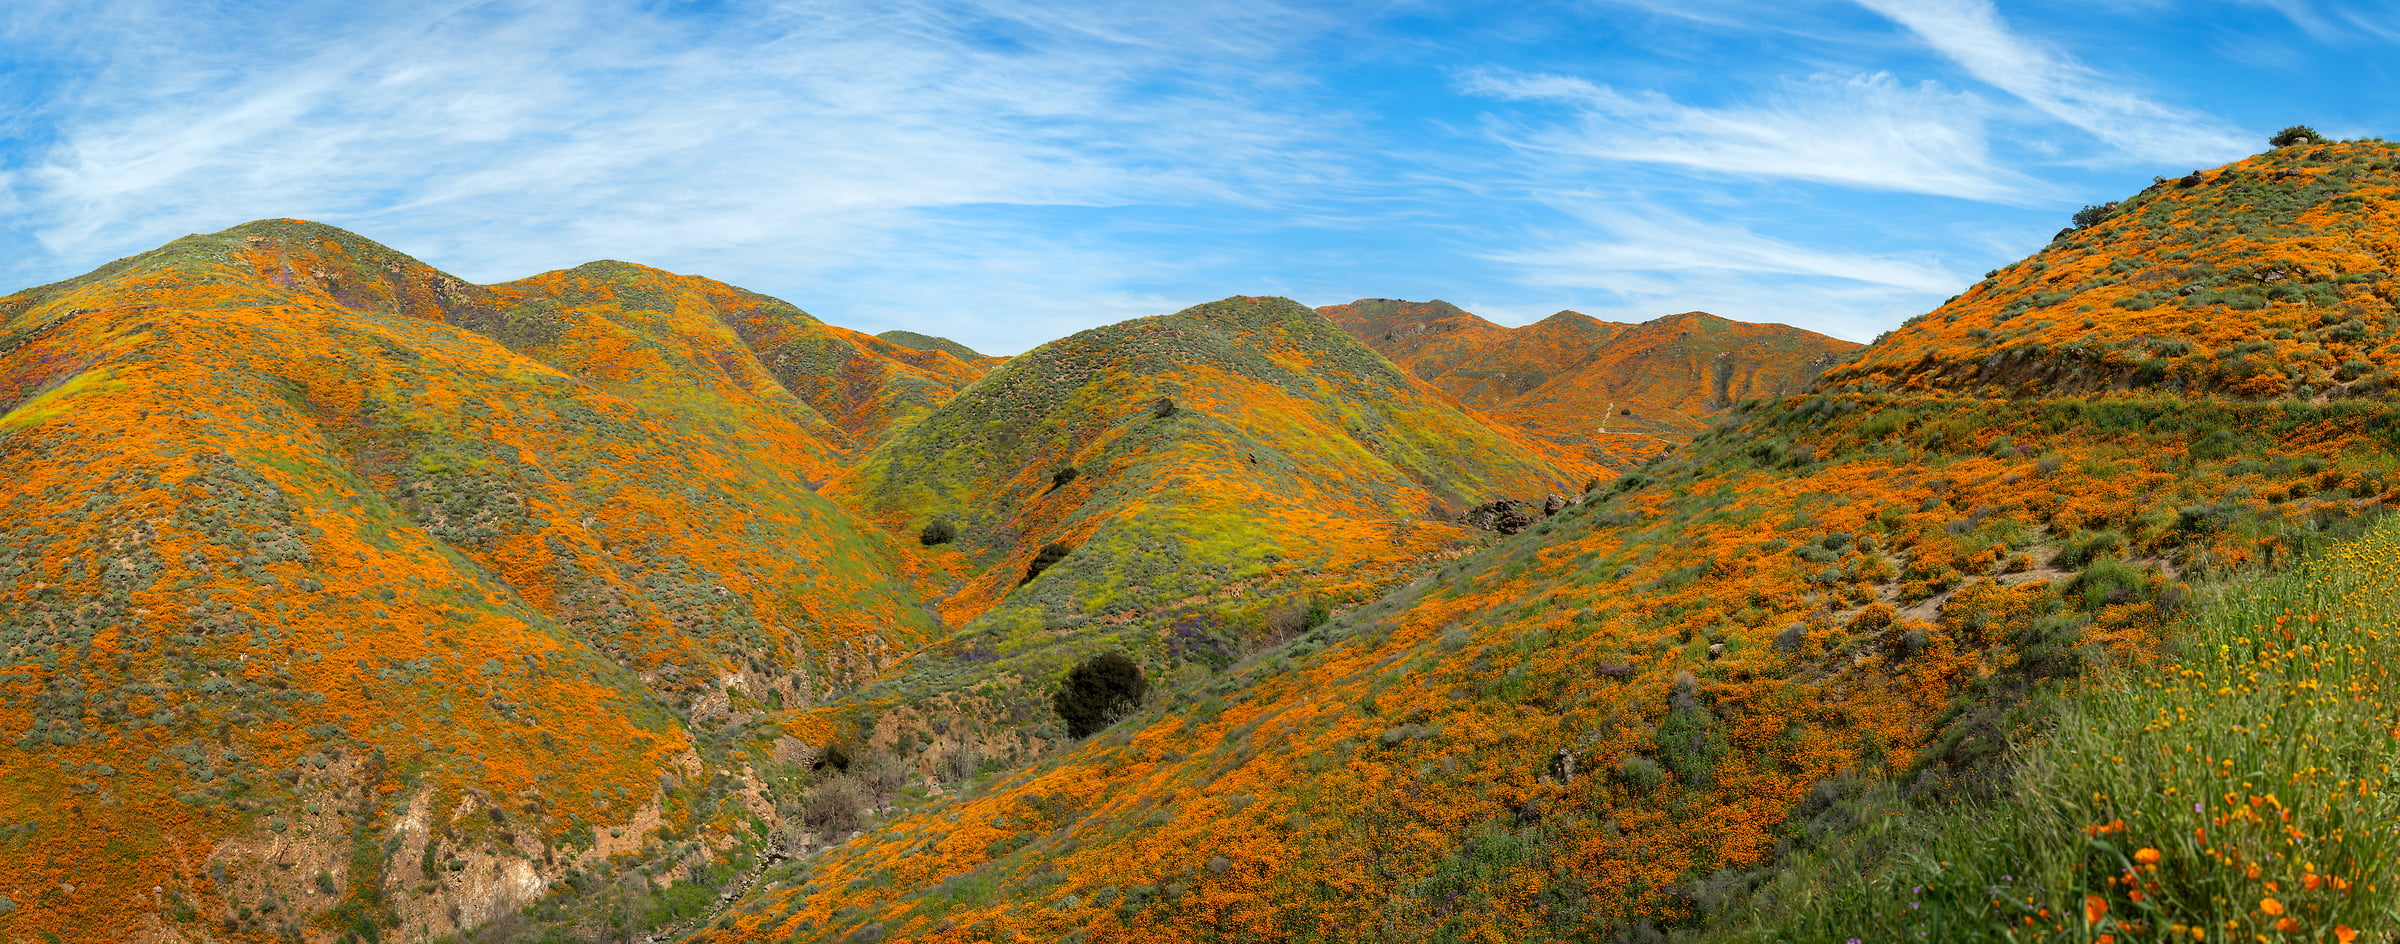 1,153 megapixels! A very high resolution, large-format VAST photo print of poppy wildflowers on the rolling hills and valleys of Walker Canyon; landscape photograph created by Jim Tarpo in Walker Canyon, California.